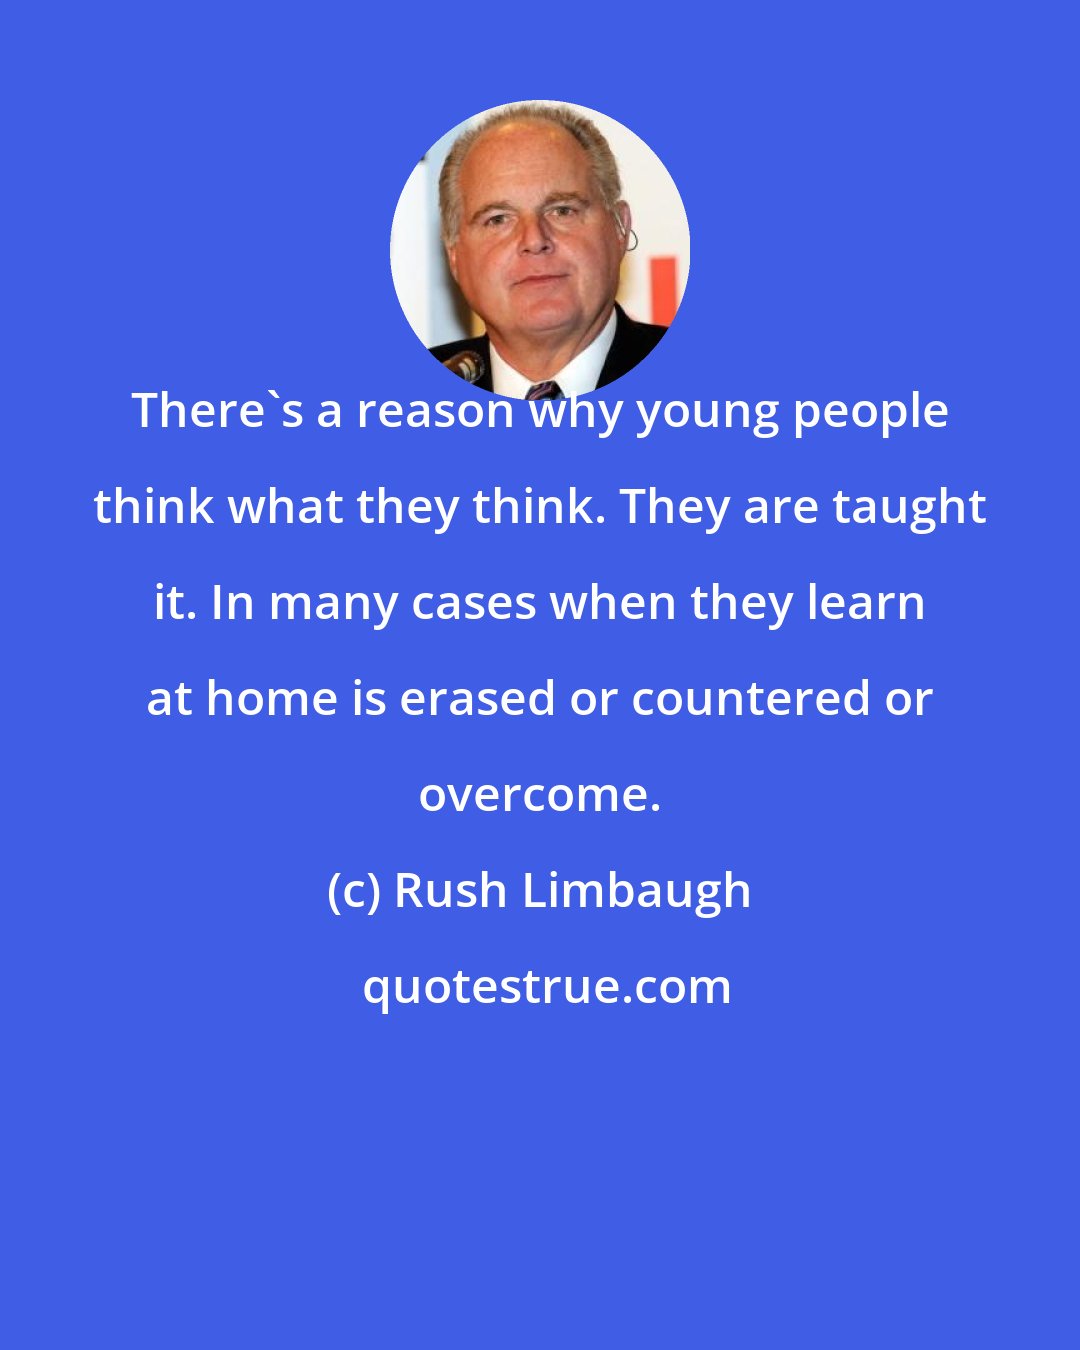 Rush Limbaugh: There's a reason why young people think what they think. They are taught it. In many cases when they learn at home is erased or countered or overcome.